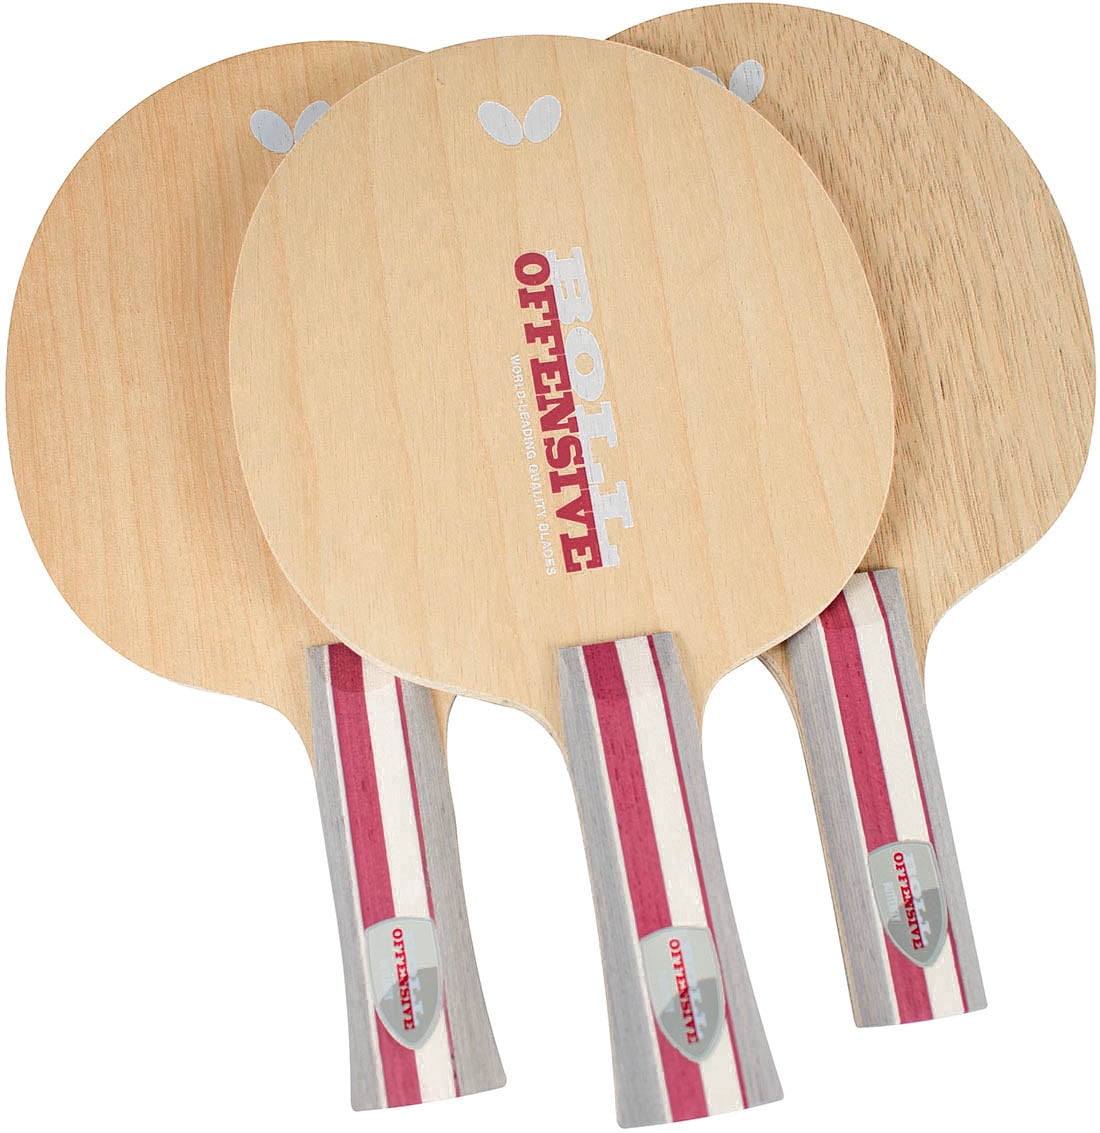 ST/FL Table Tennis Paddles Ping Pong Butterfly Timo Boll T5000 Blade Shakehand 